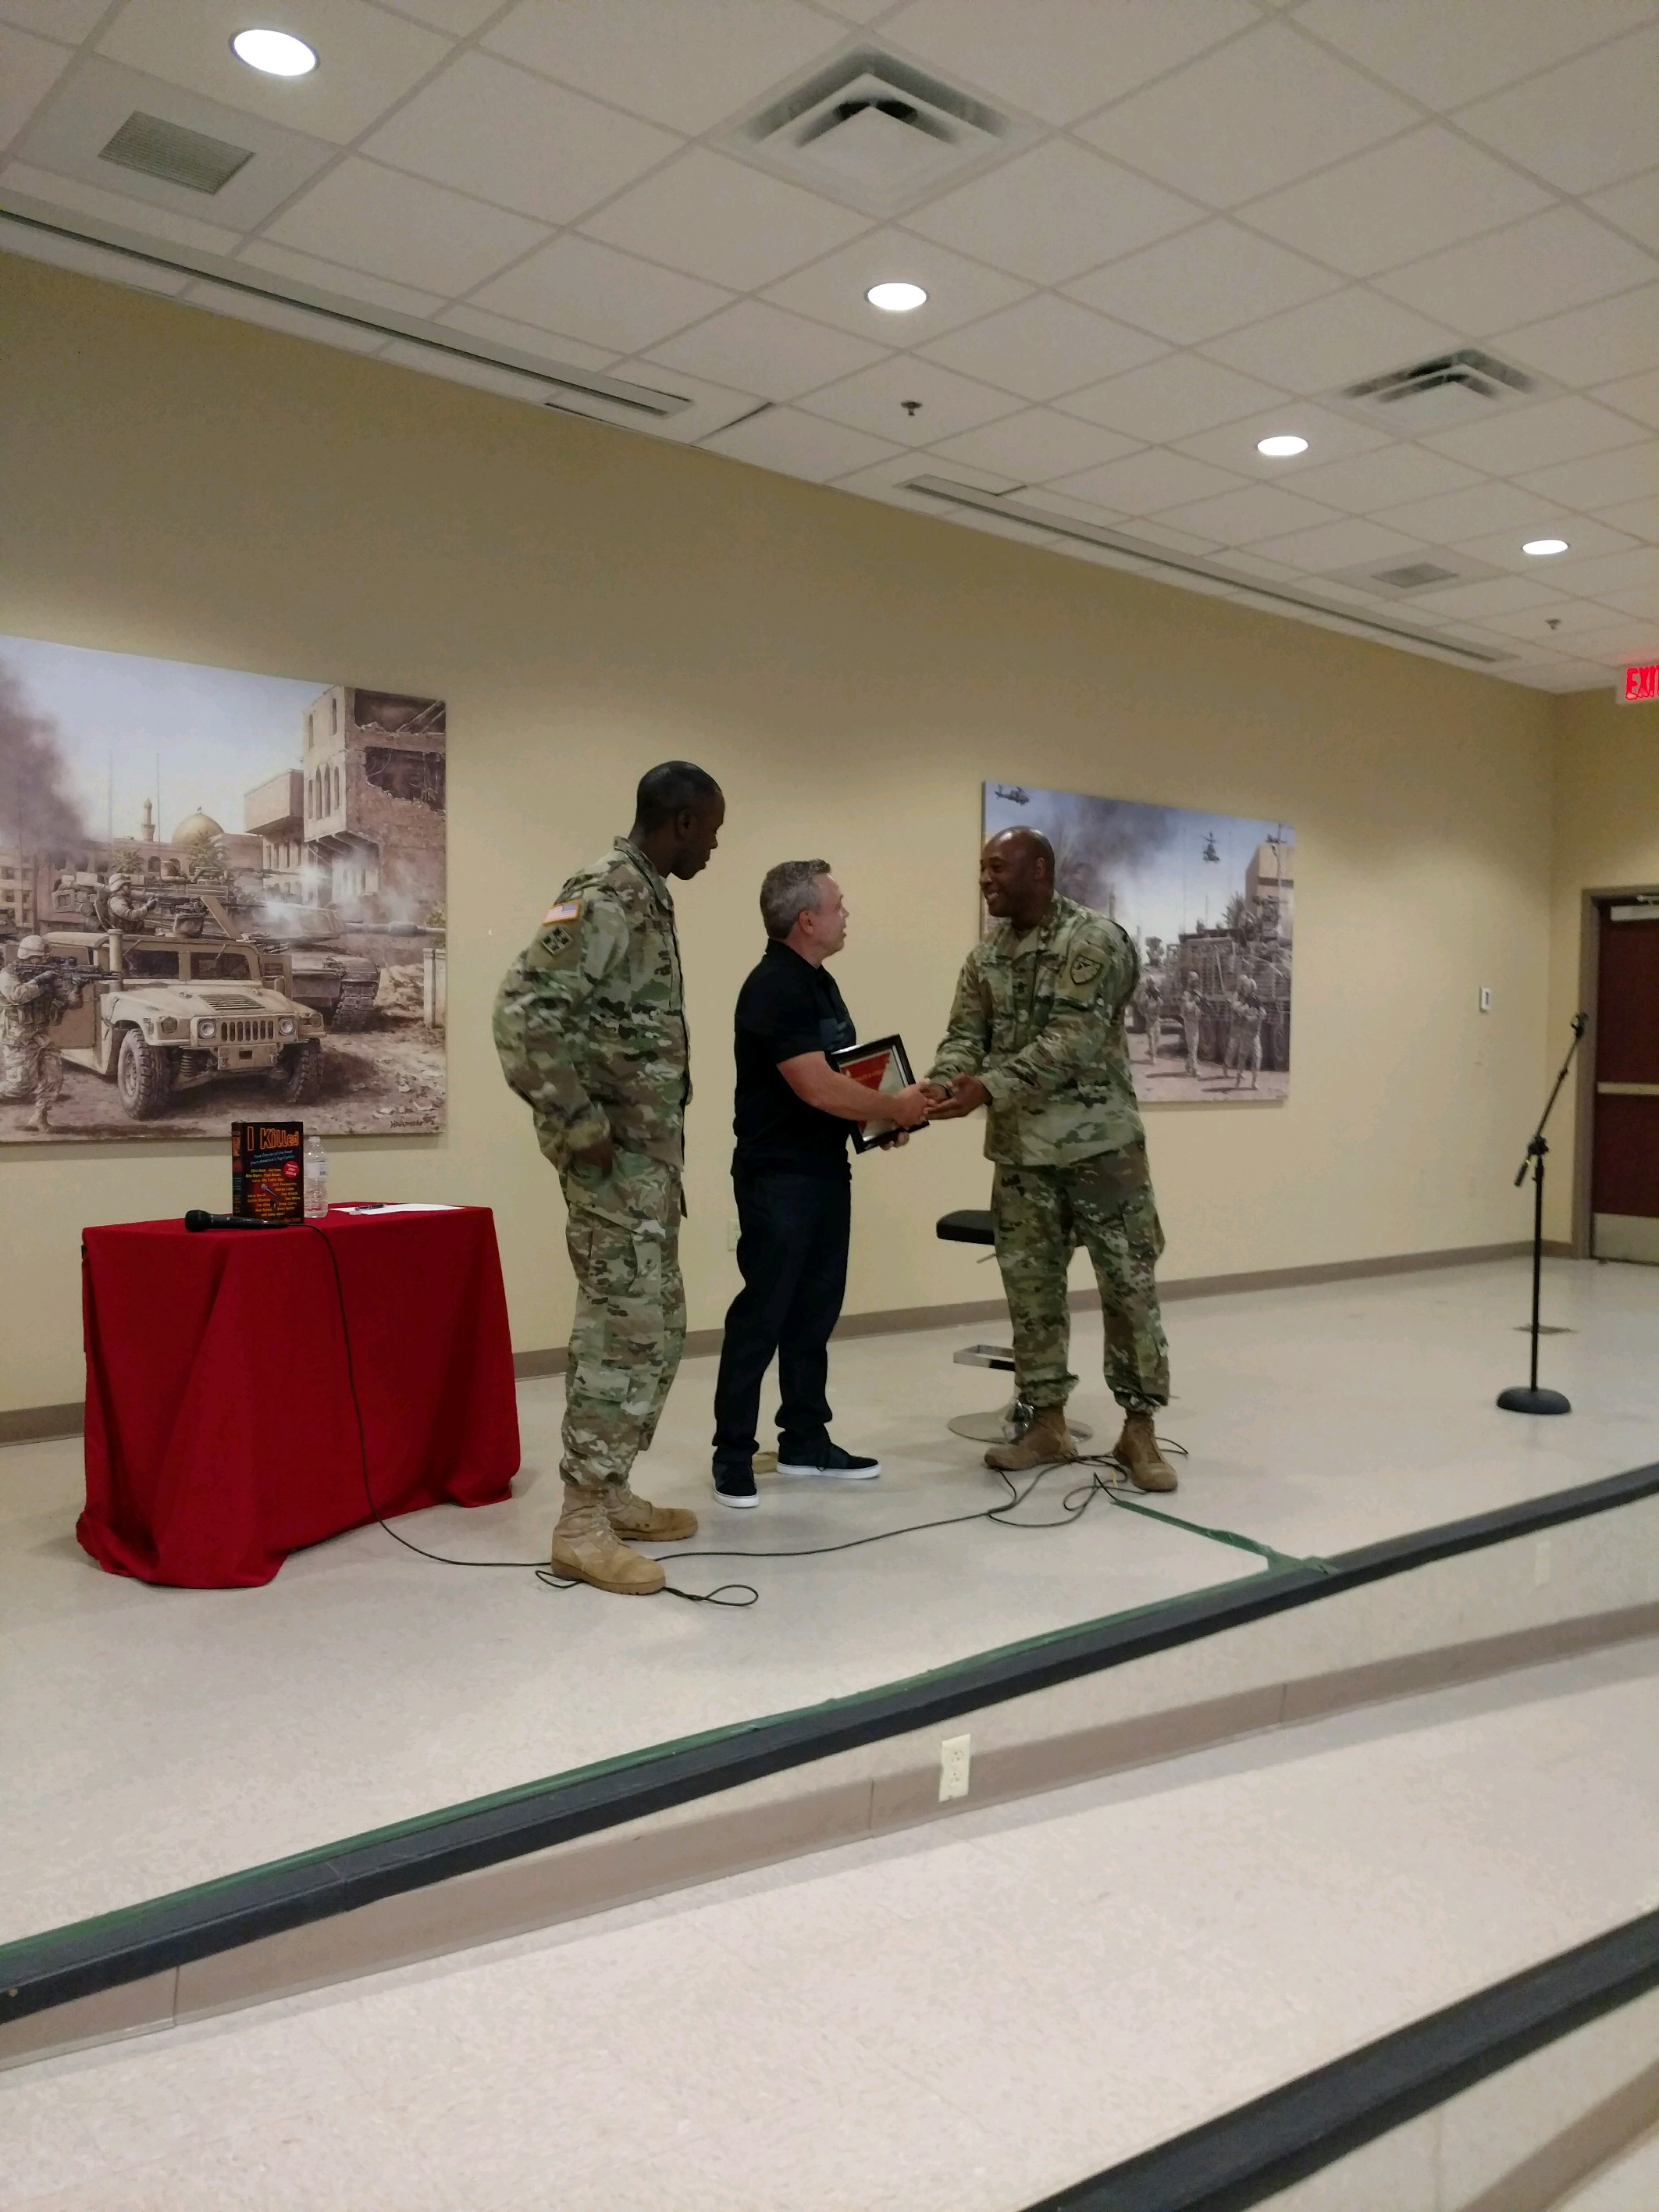 Ft Benning- Home of the Maneuver Center of Excellence – Comedy is the Cure